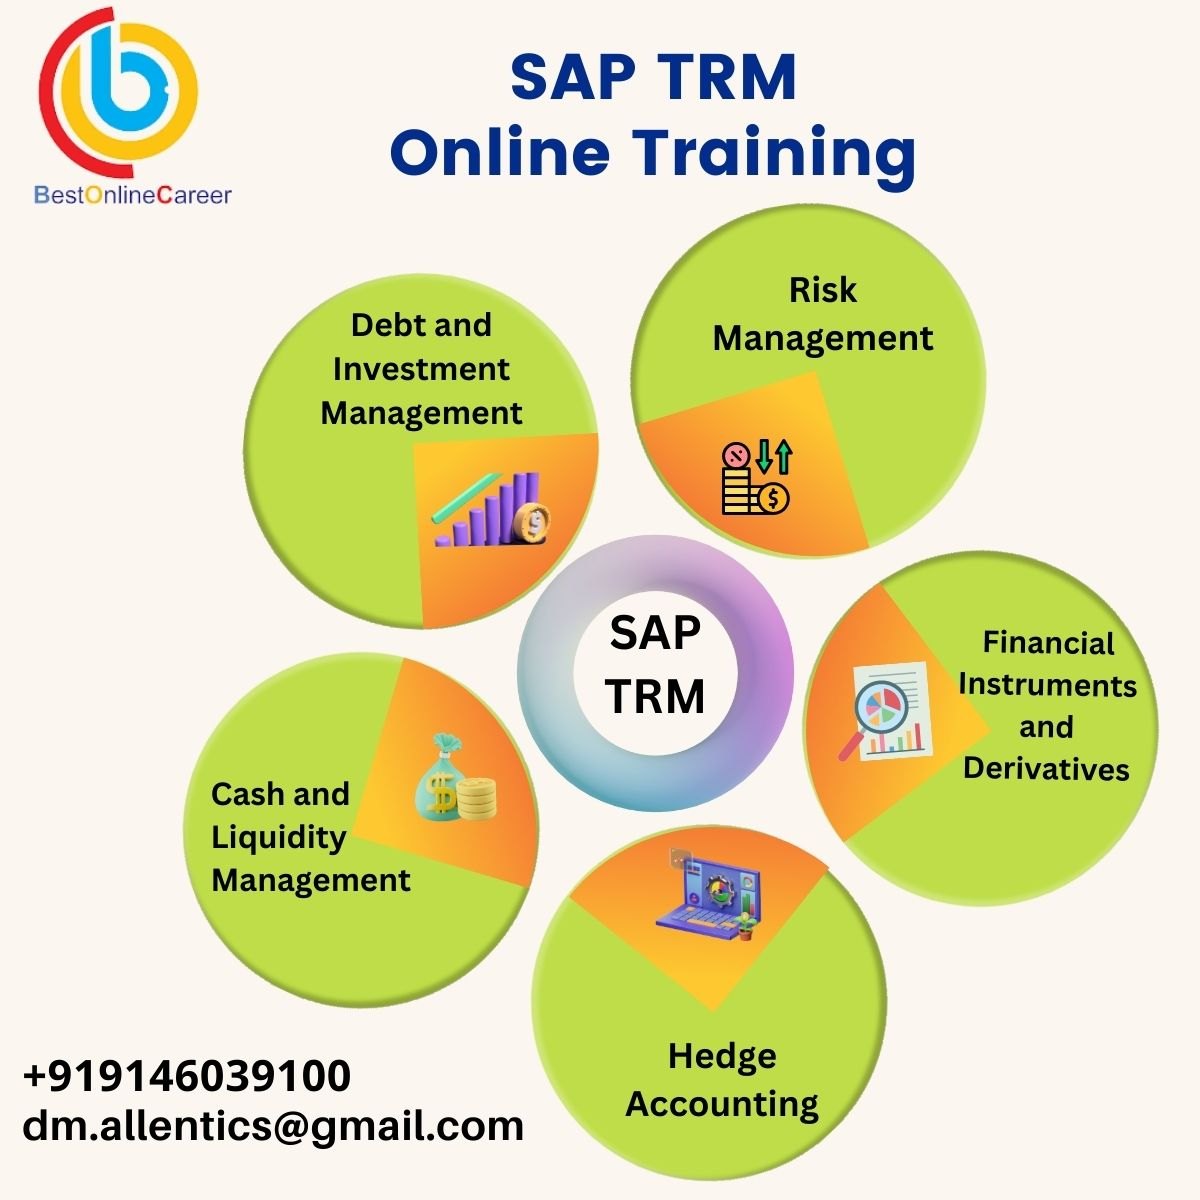 SAP TRM Online Training Course: Your Path to Financial Excellence